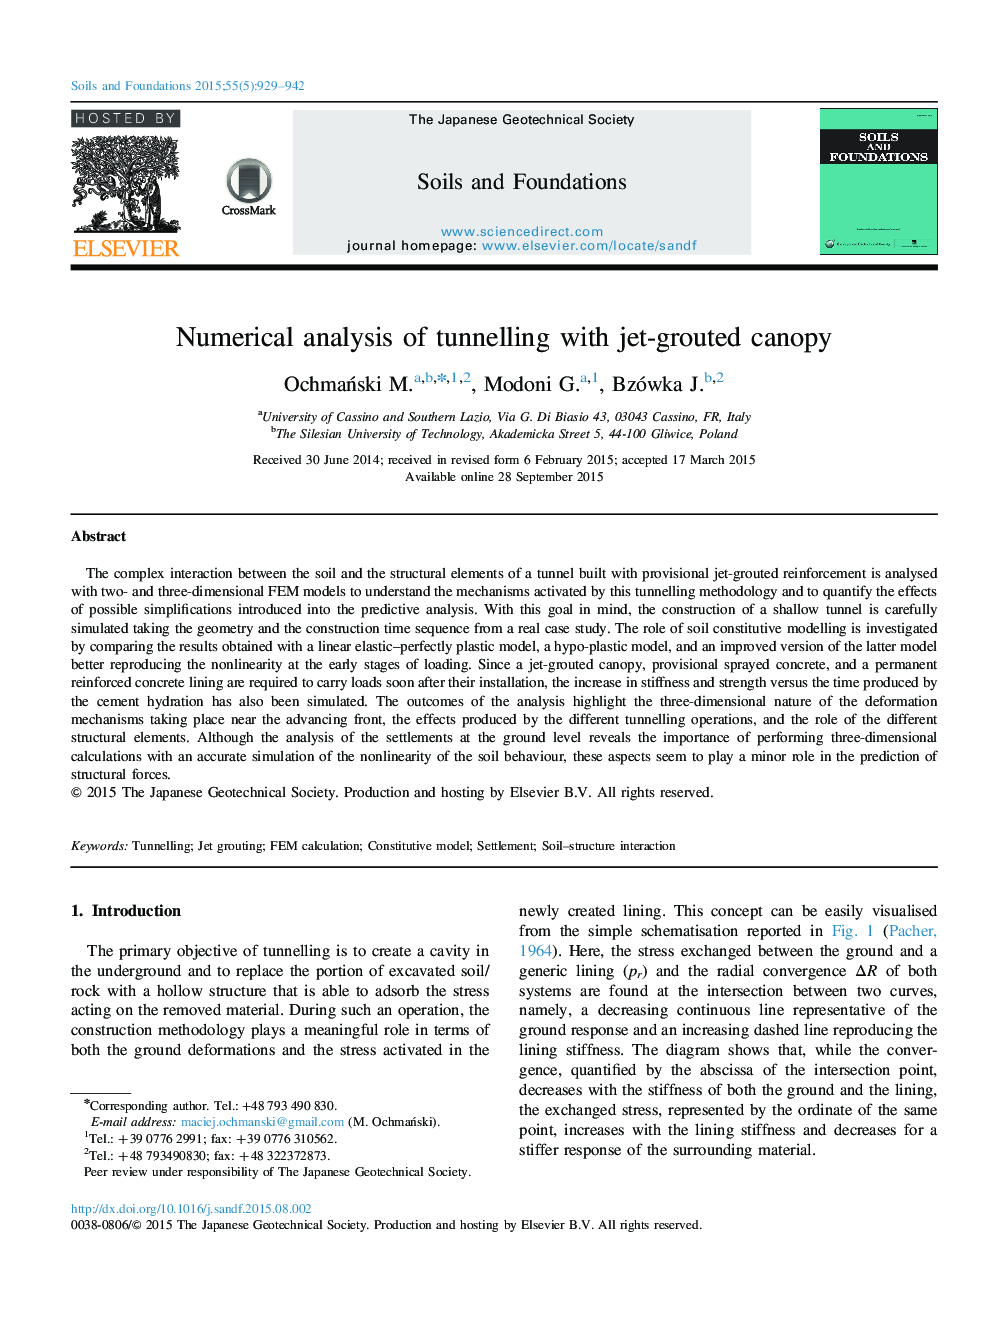 Numerical analysis of tunnelling with jet-grouted canopy